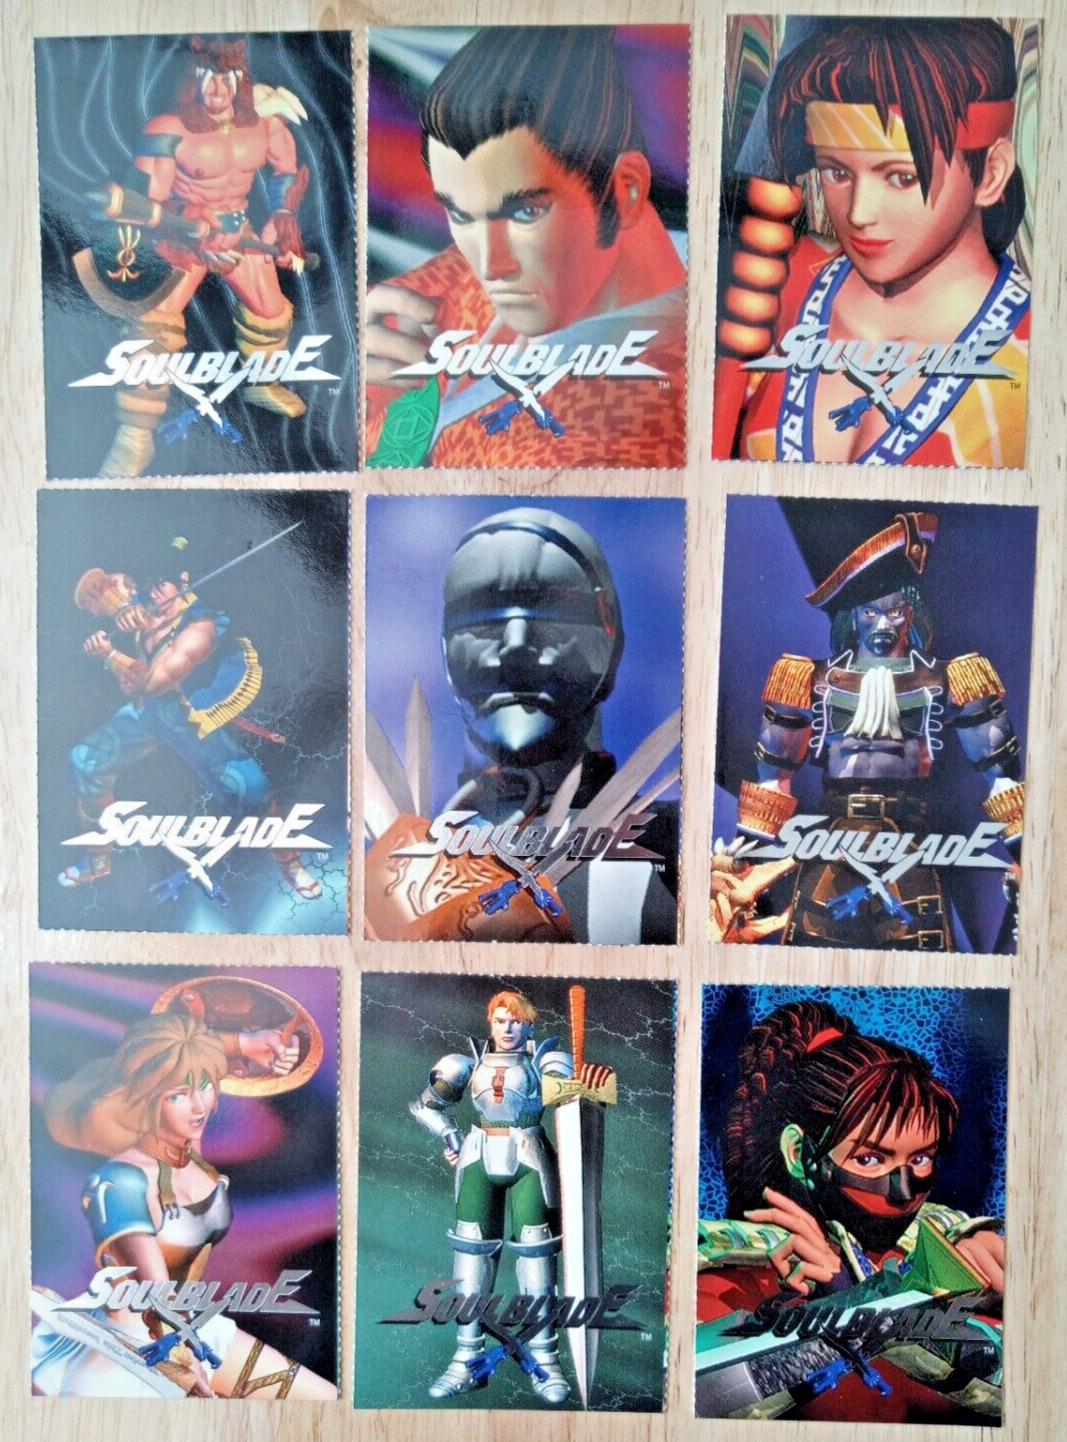 1995/1996 SOULBLADE ⭐️ Namco Playstation PS1 Promo ⭐️ Lot of 9 Character Cards